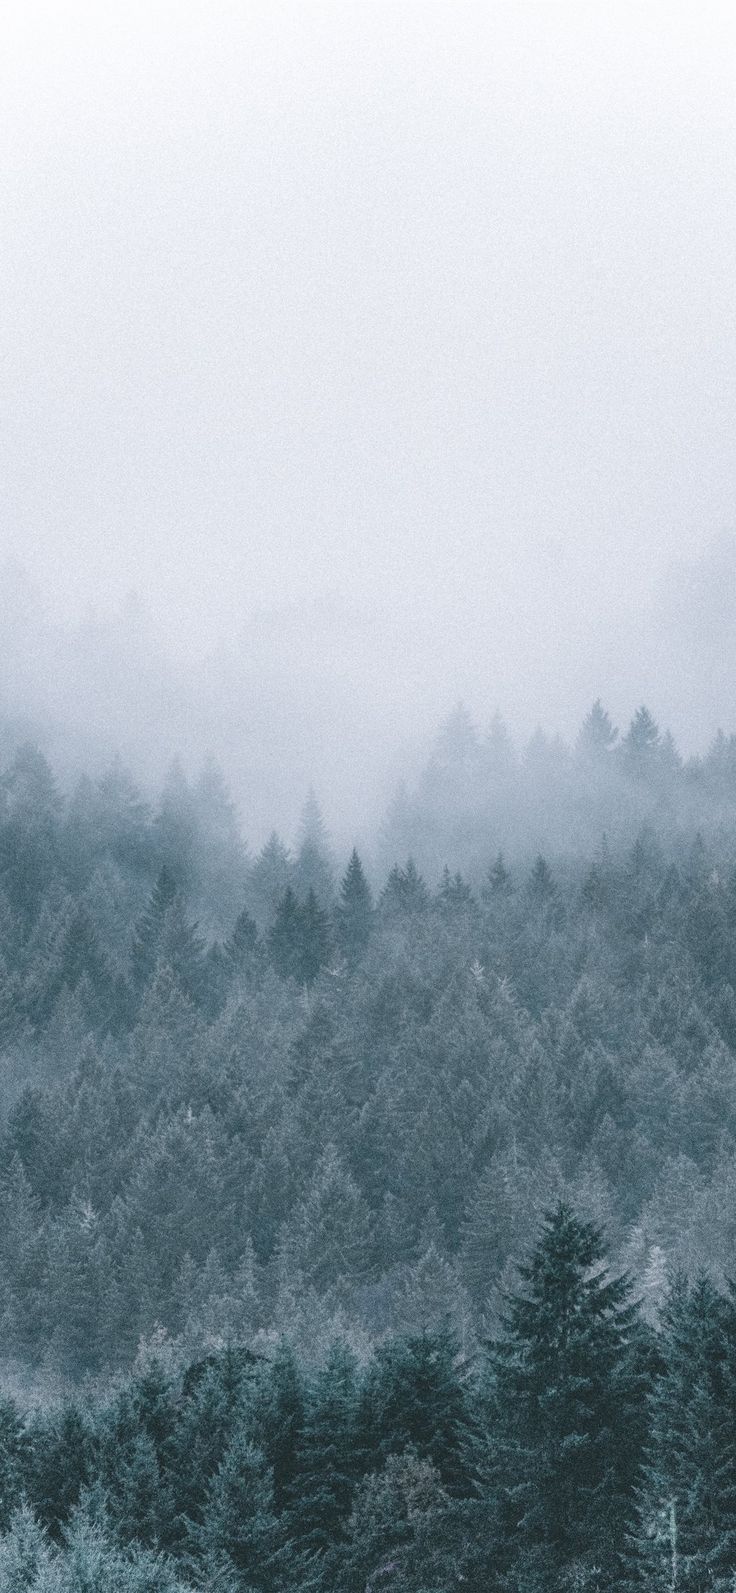 foggy icy green pine trees scenery Wallpaper. Tree scenery wallpaper, Scenery wallpaper, iPhone wallpaper mountains